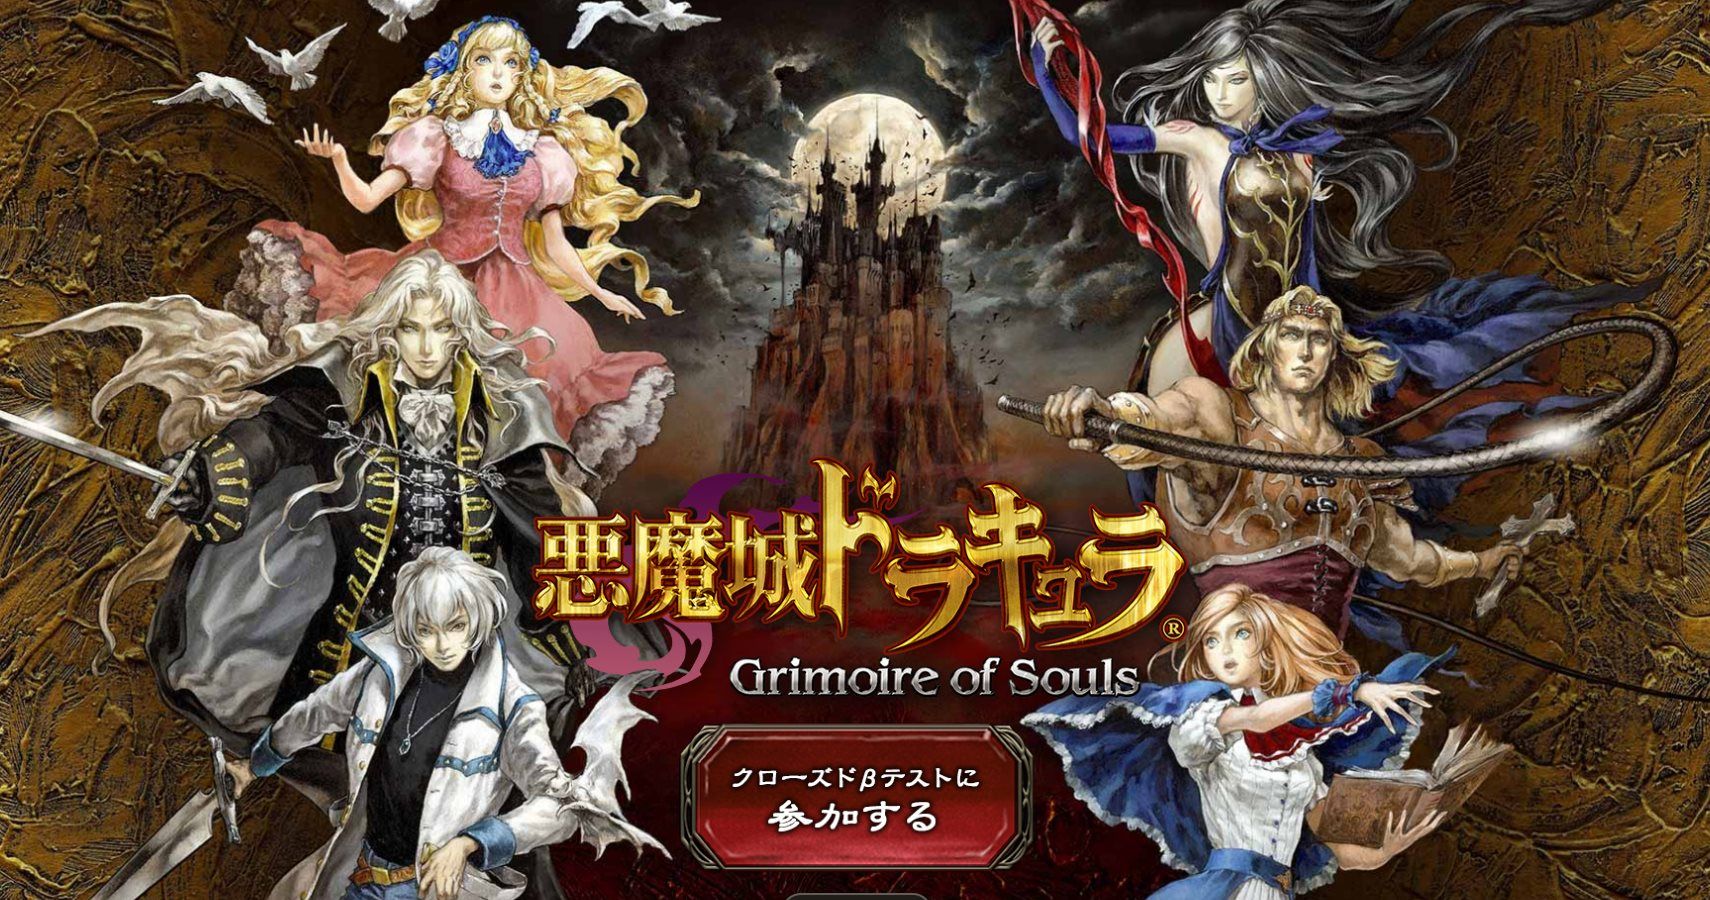 There's A New Castlevania Game Coming... To iPhones... In Japan